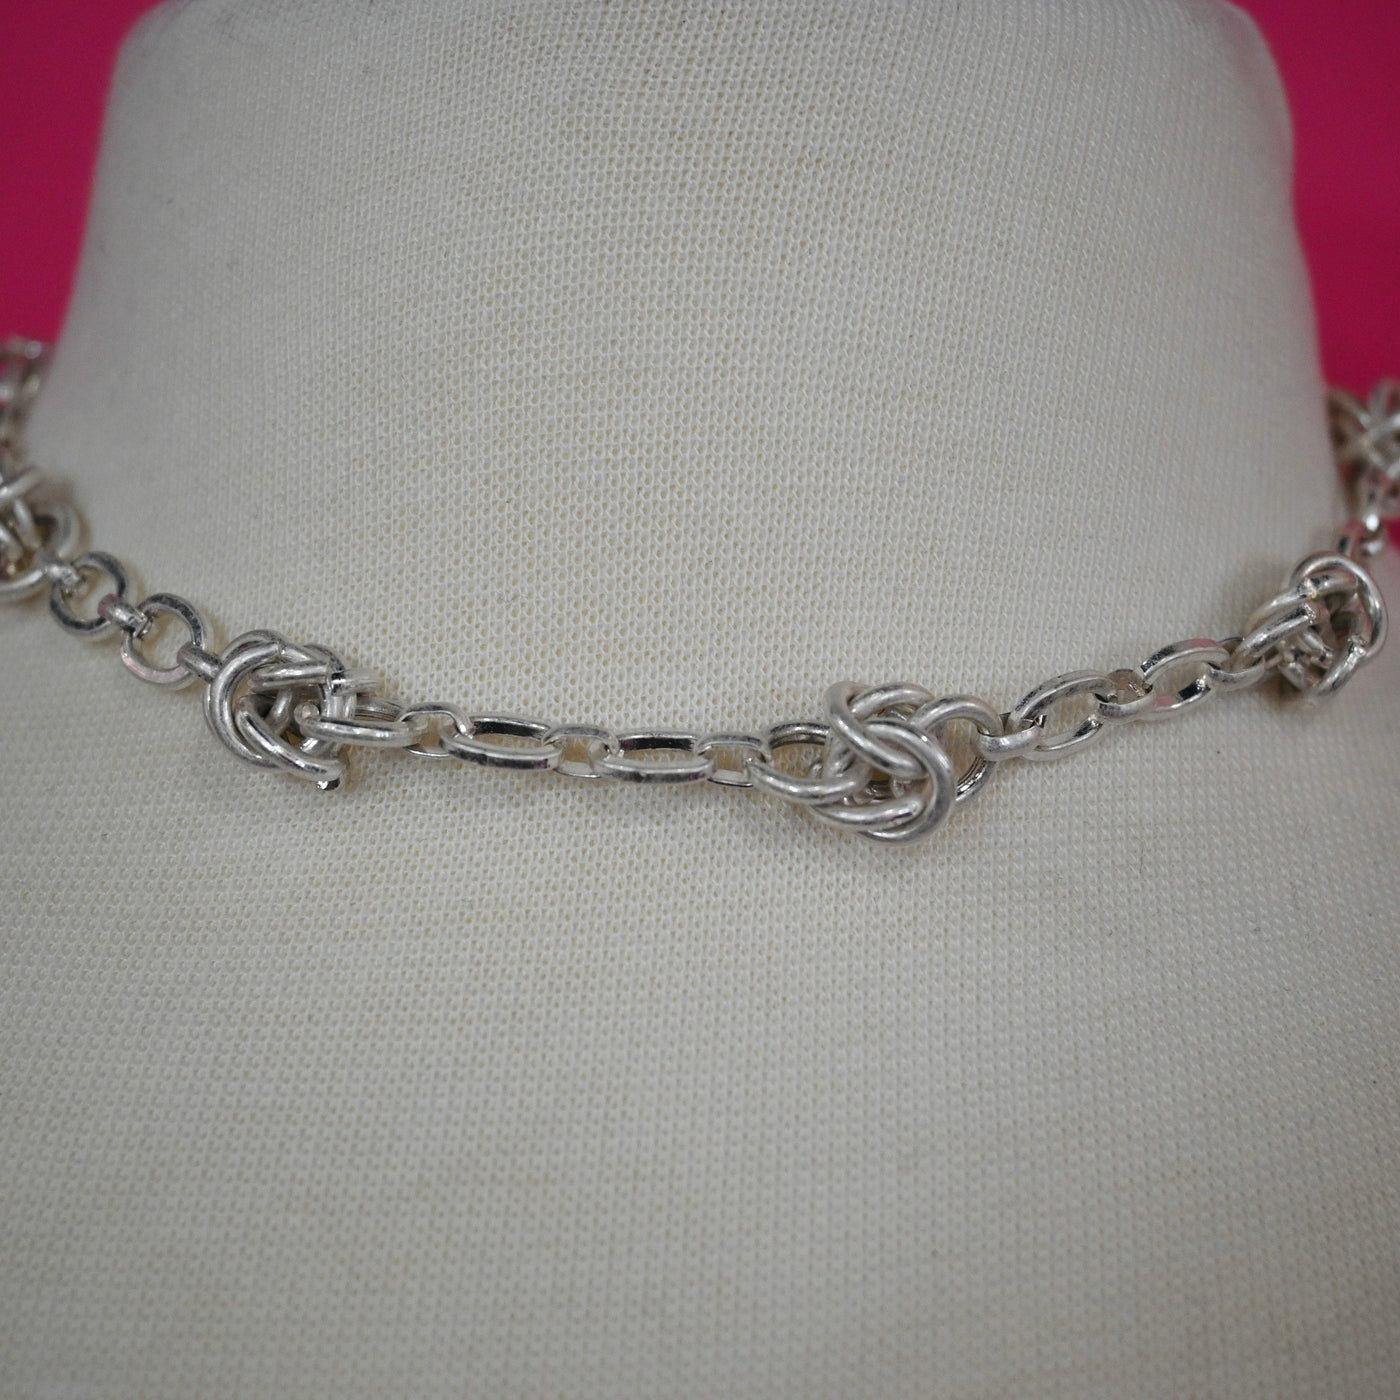 Metal Knot Chain Necklace// 2 COLORS